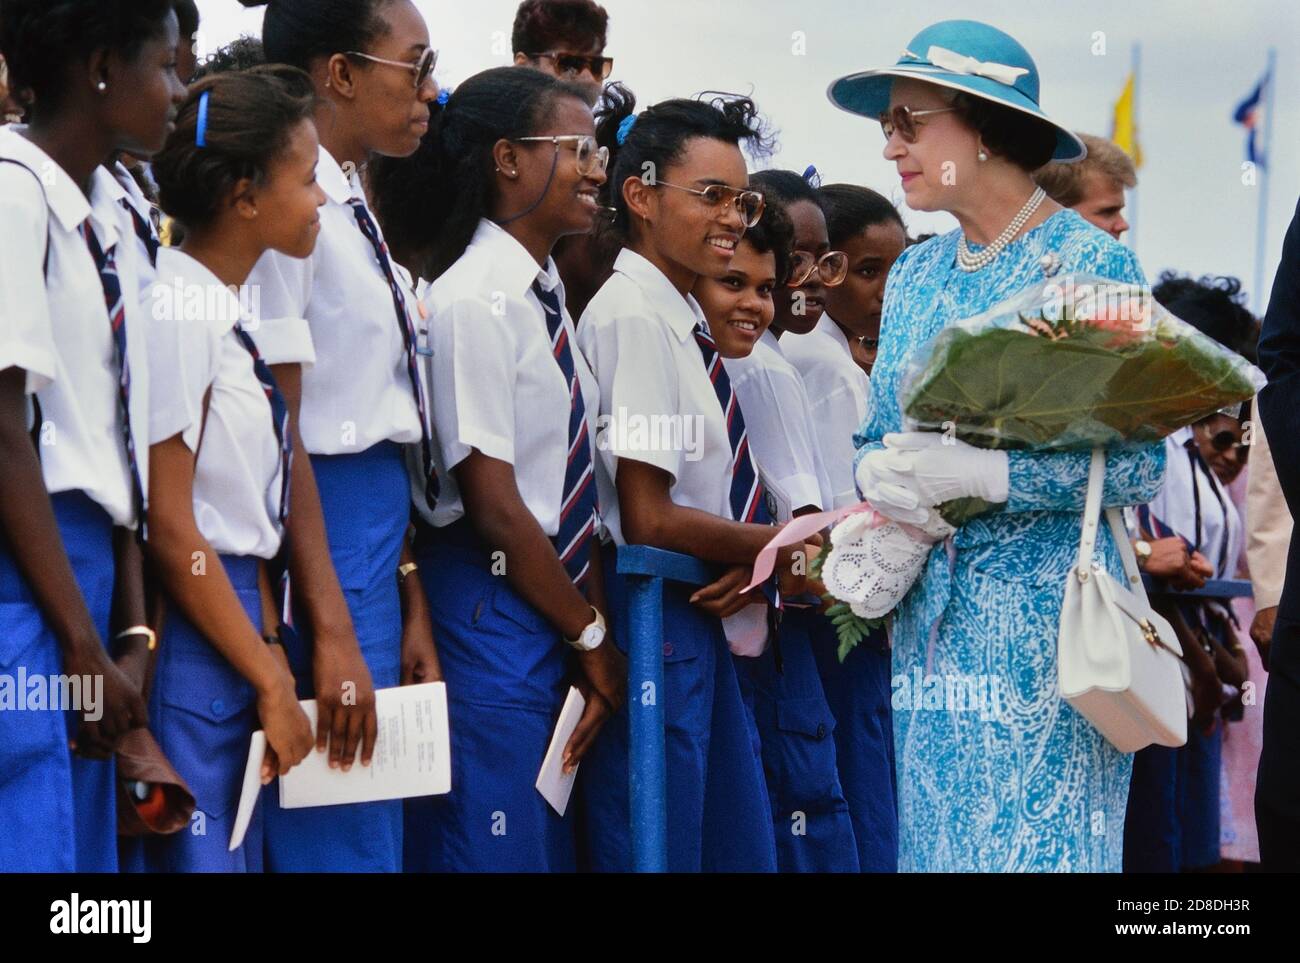 A line of local students and pupils greet HRH Queen Elizabeth II on her visit to Queen's College. Her Majesty was on her final visit to the Caribbean Island of Barbados. March 8, 1989. Stock Photo